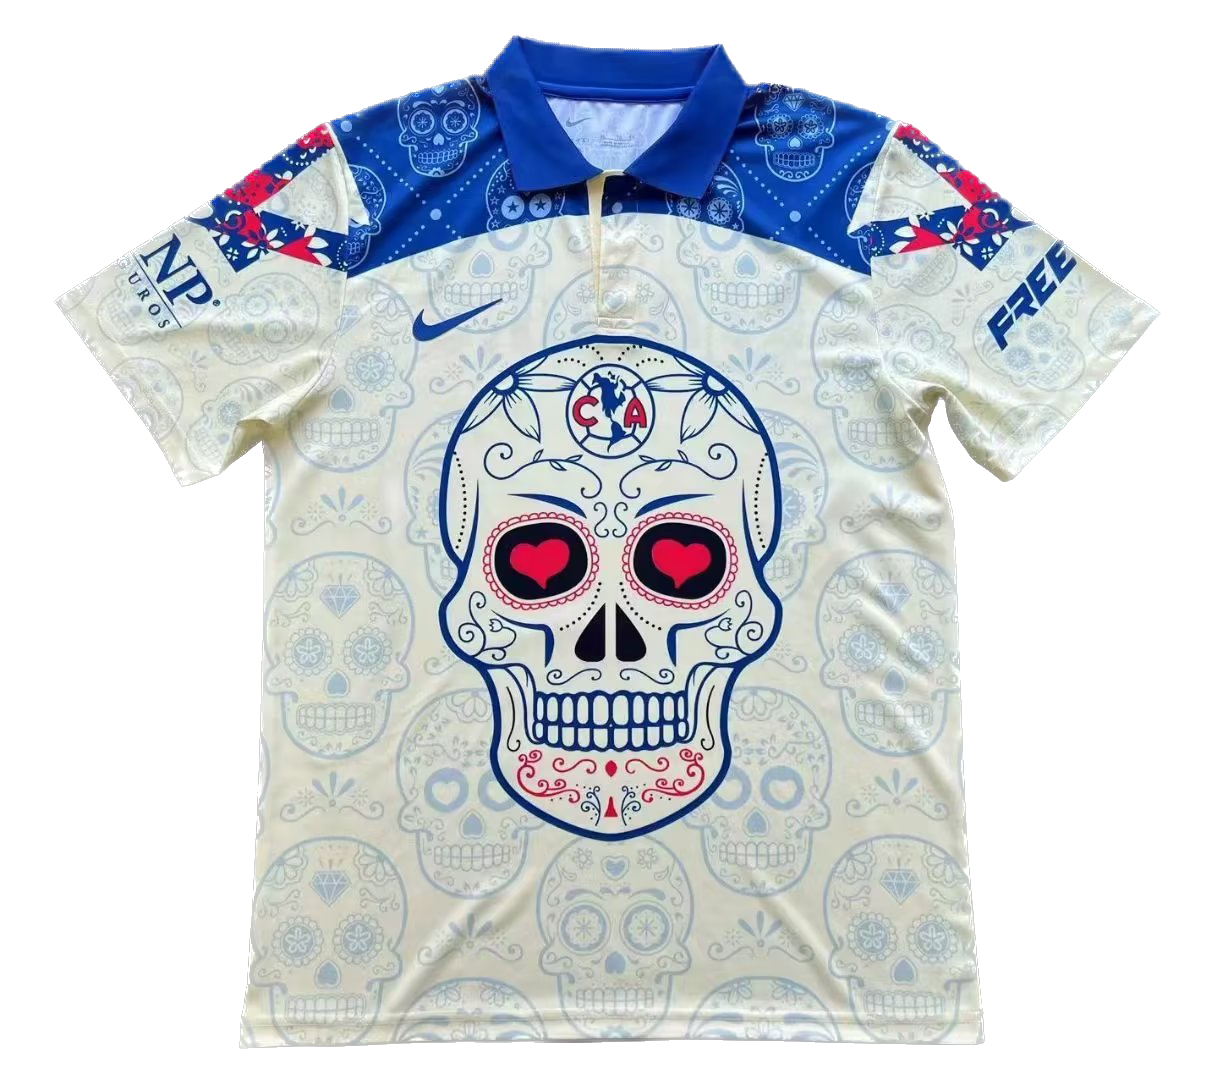 Club America New Vintage Concept Carnival Jersey